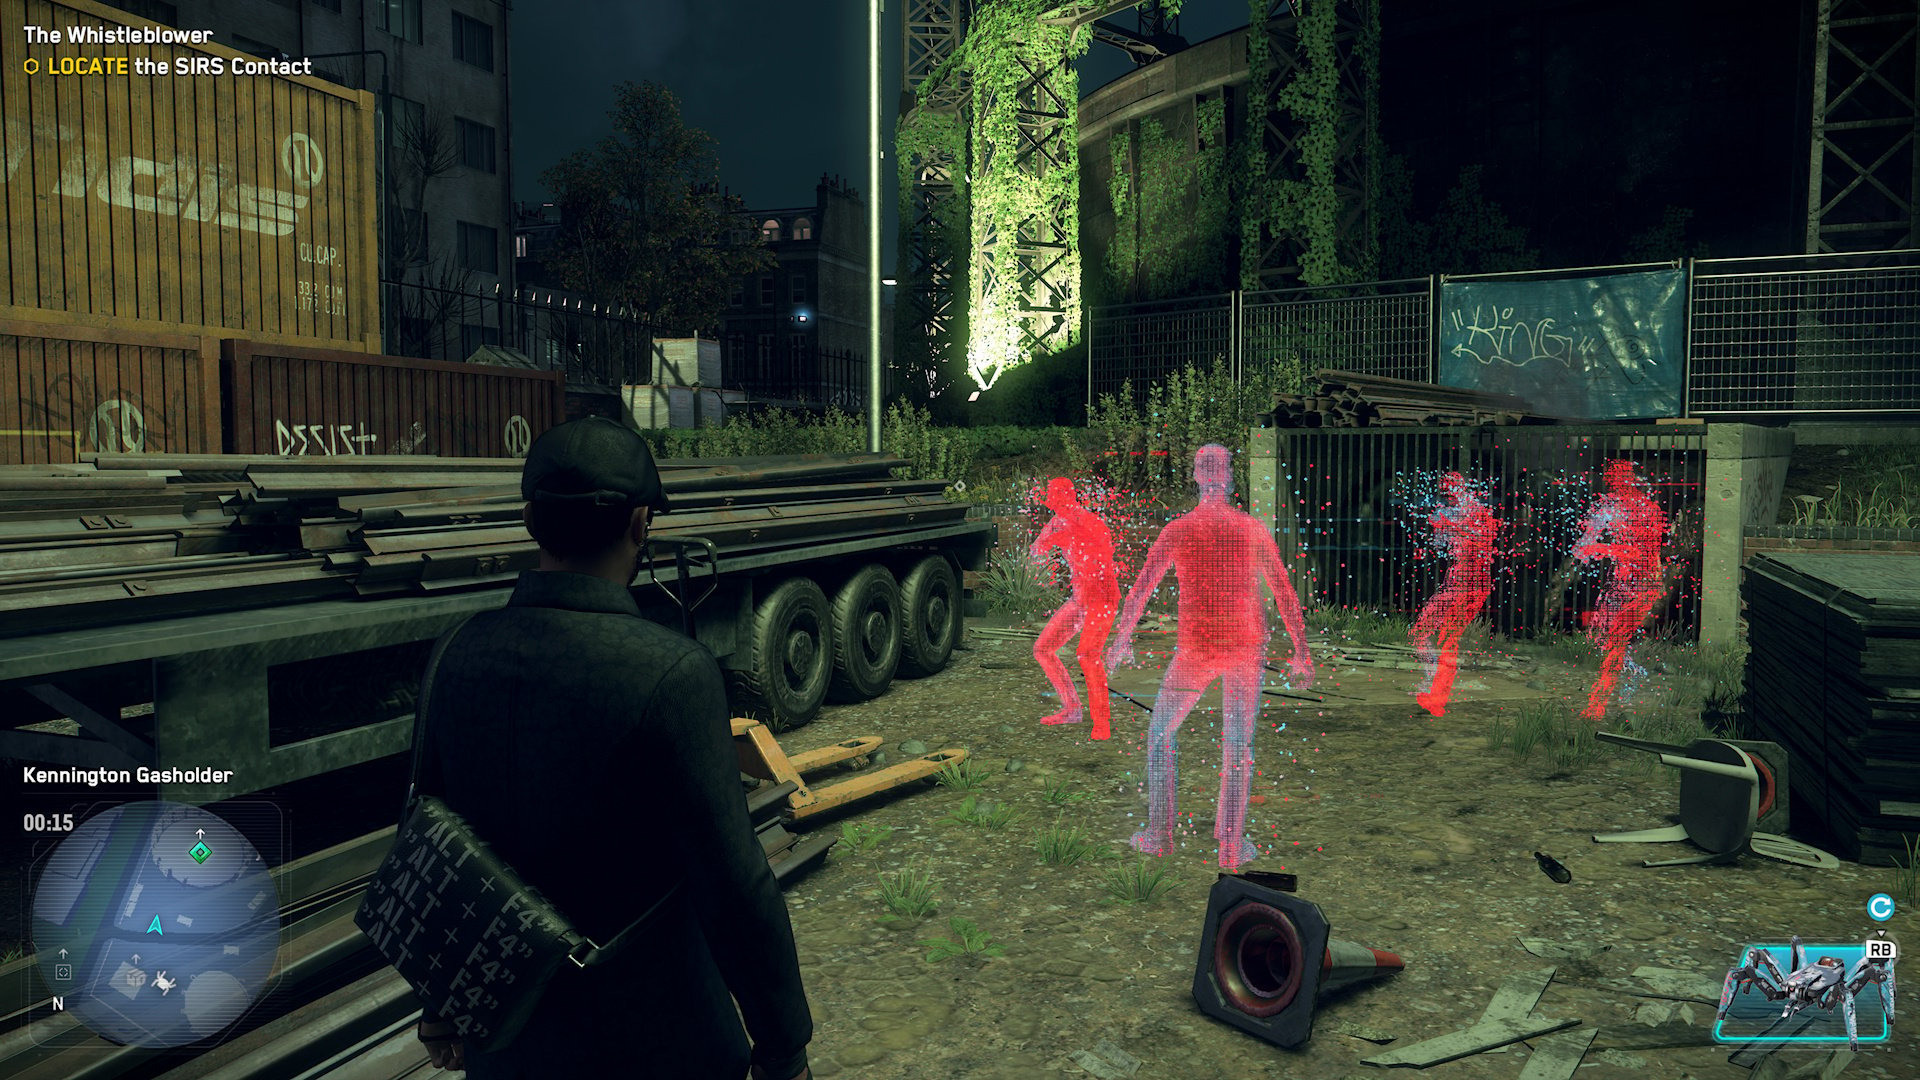 Watch Dogs: Legion Review (Xbox Series X, S)